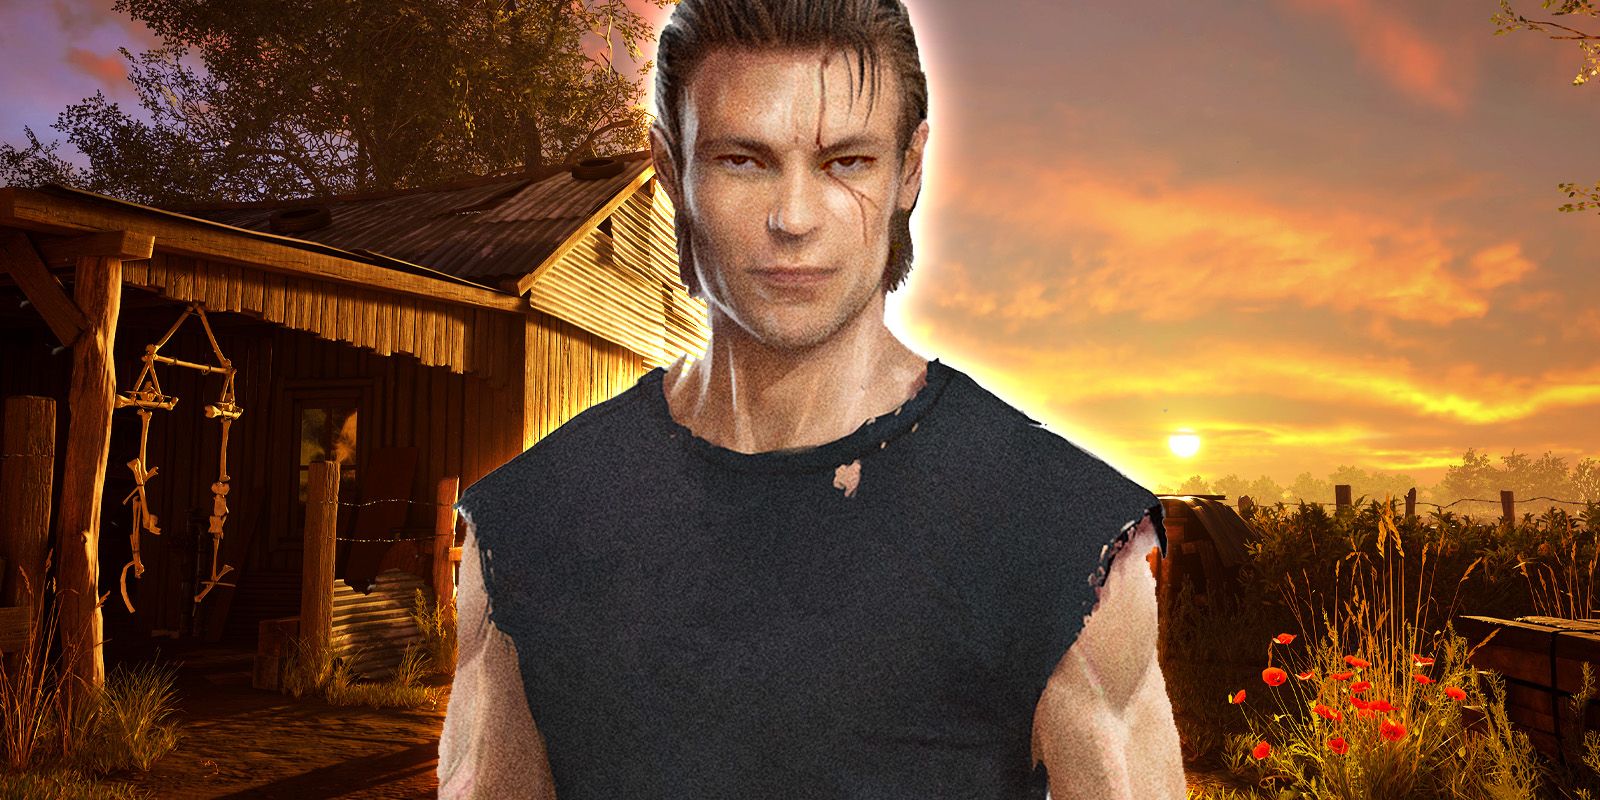 Johnny faces the camera with a slight smirk while rimmed in white. He stands against a golden background of the shed behind the Family House.